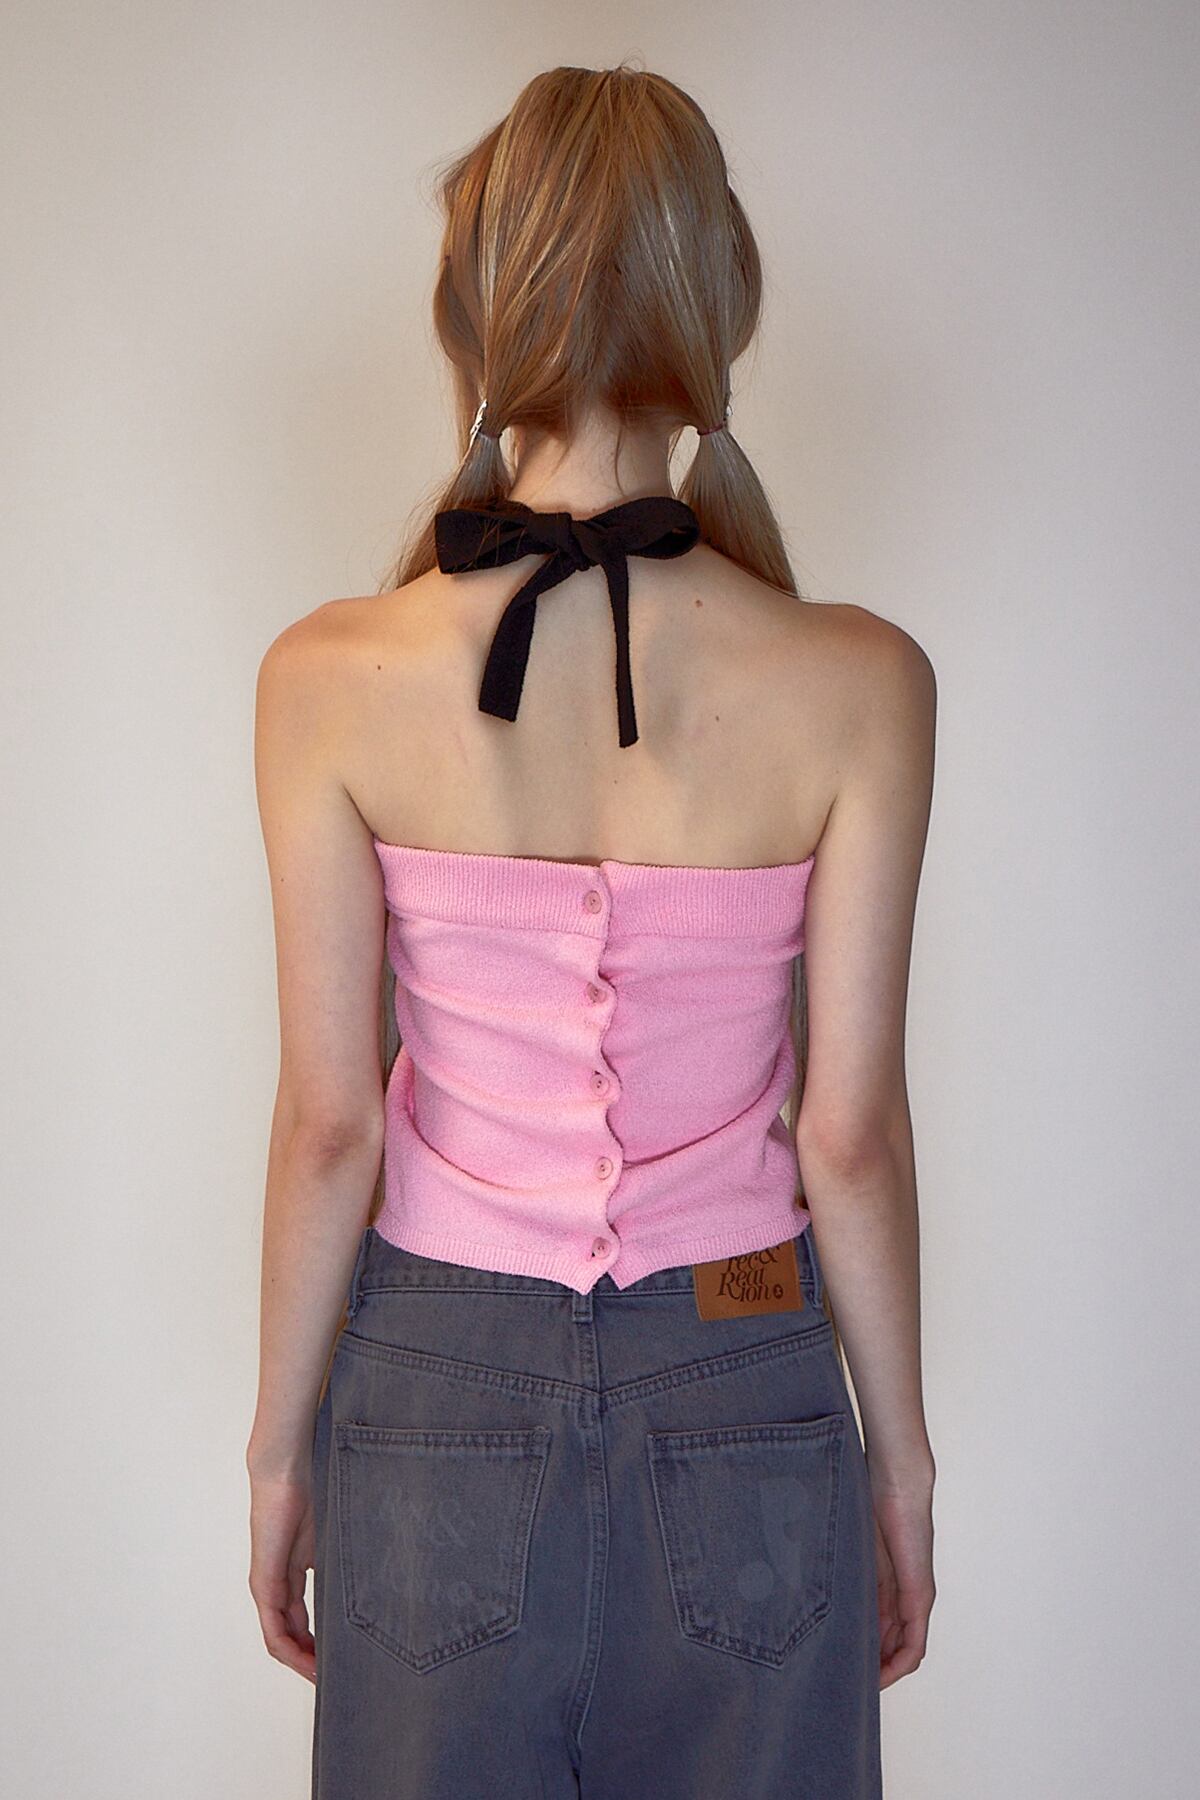 rest & recreation] RR LOGO KNIT TUBE TOP - PINK 正規韓国ブランド